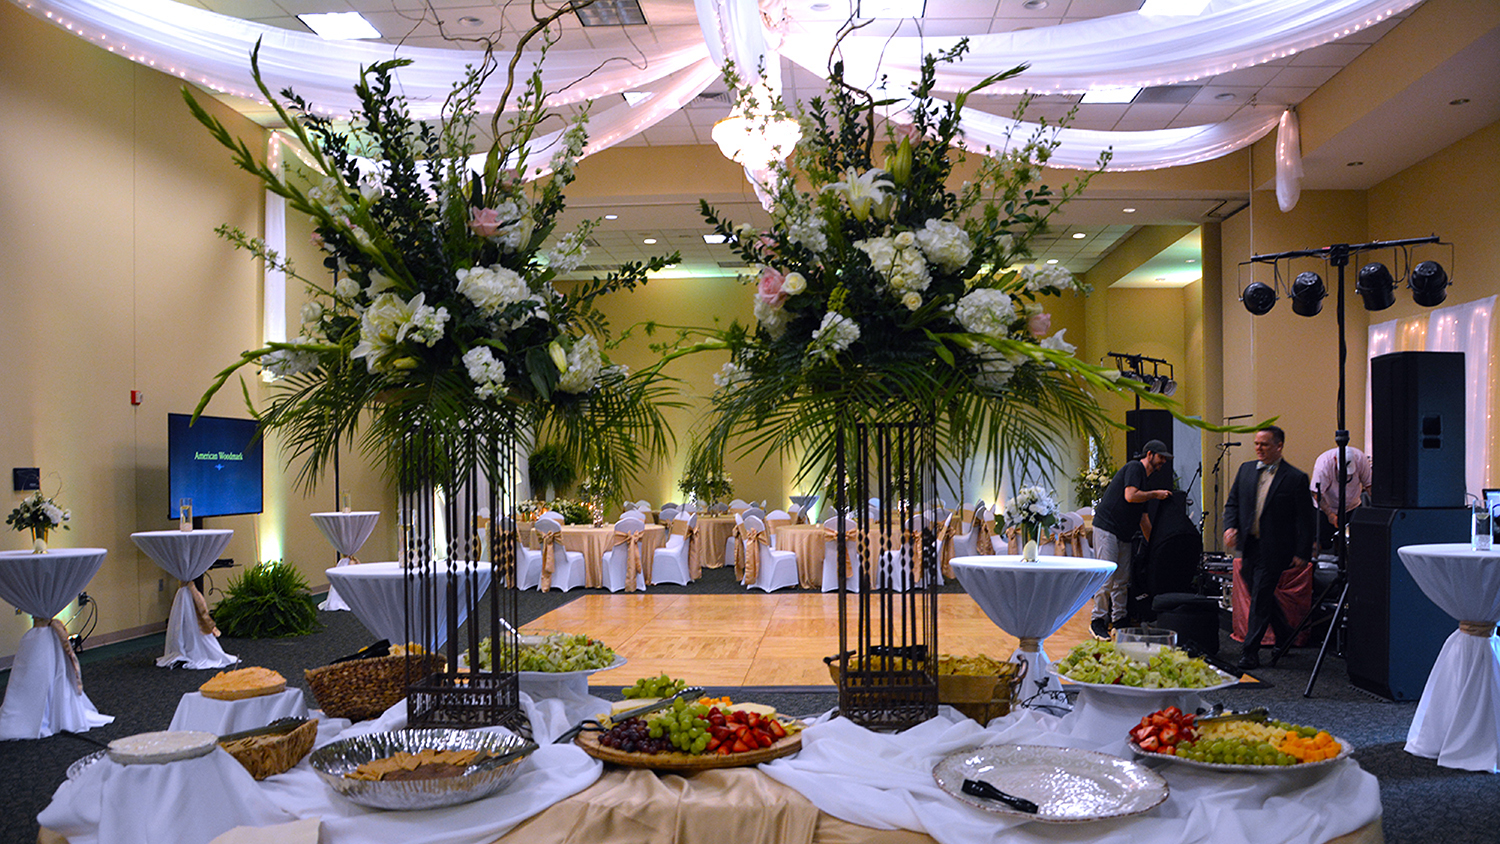 Picture of banquet room decorated for the Gala